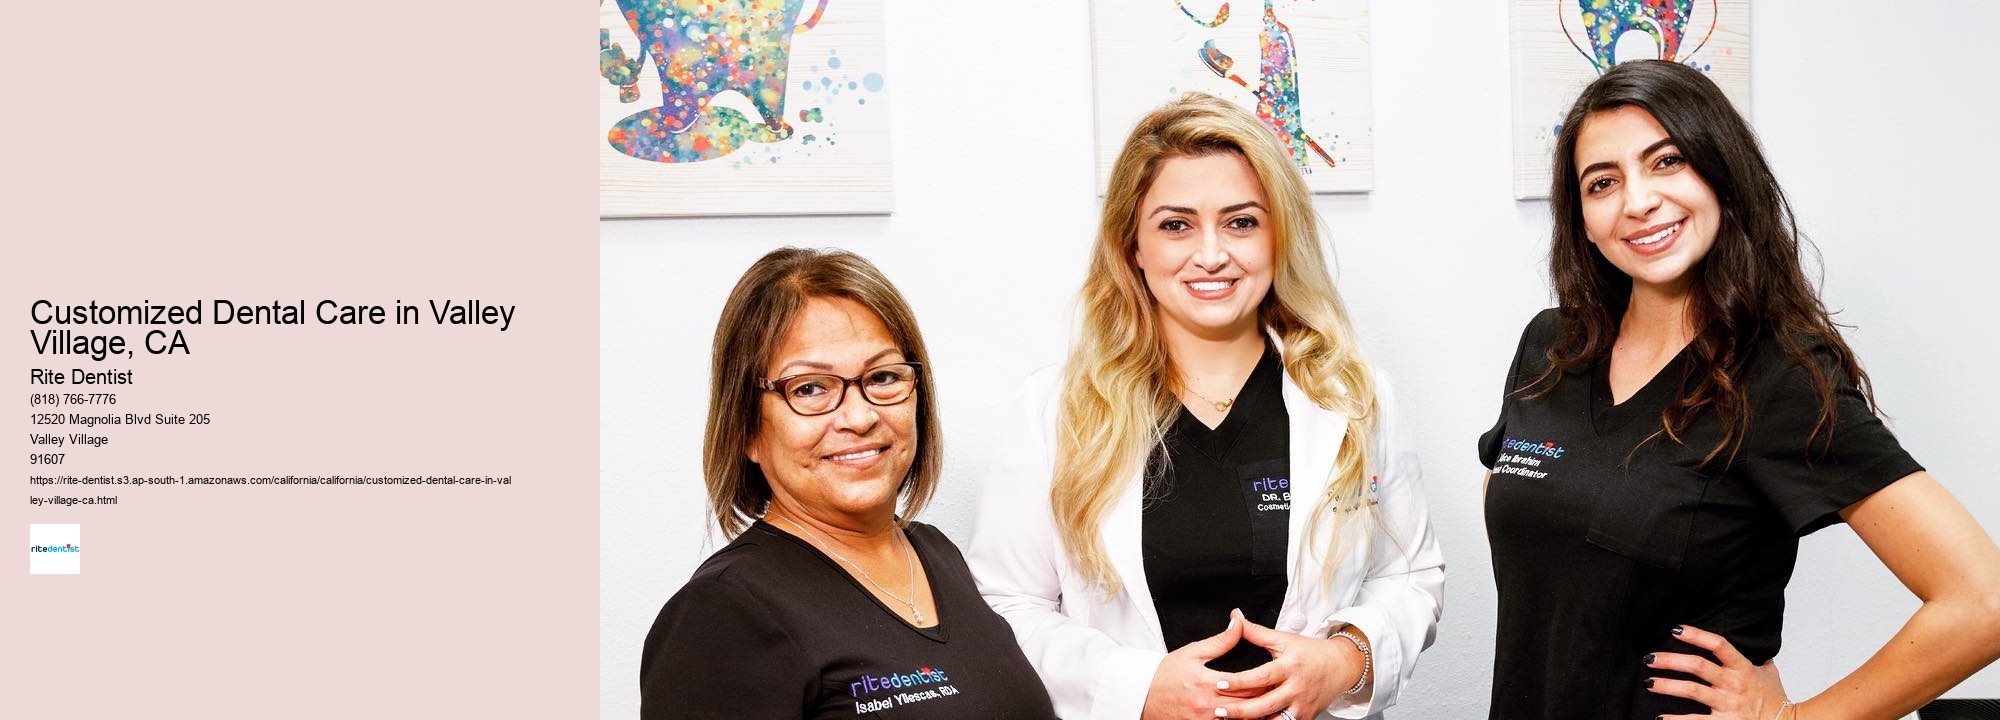 Customized Dental Care in Valley Village, CA